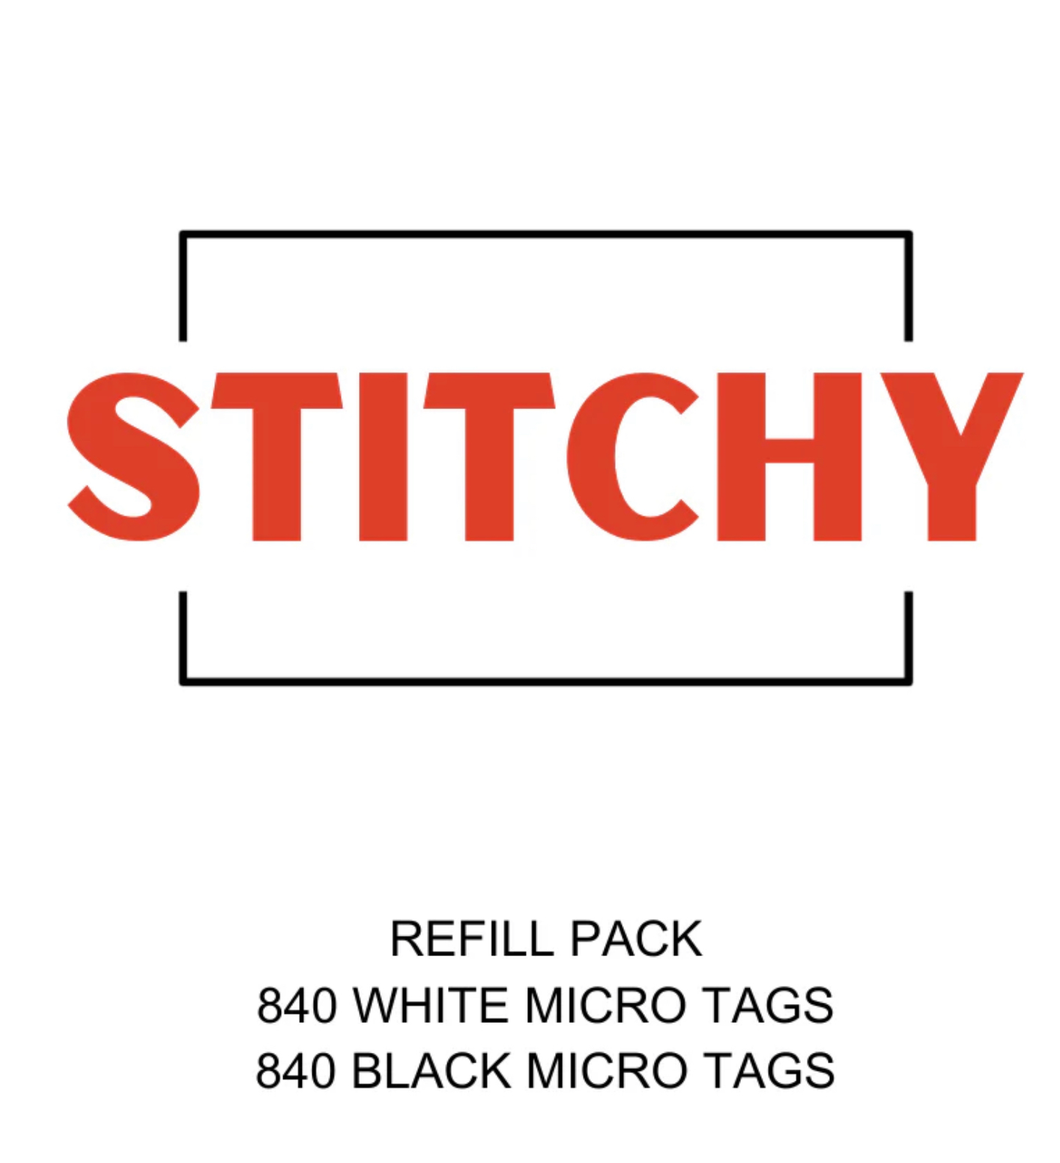 Stitchy Refill Pack